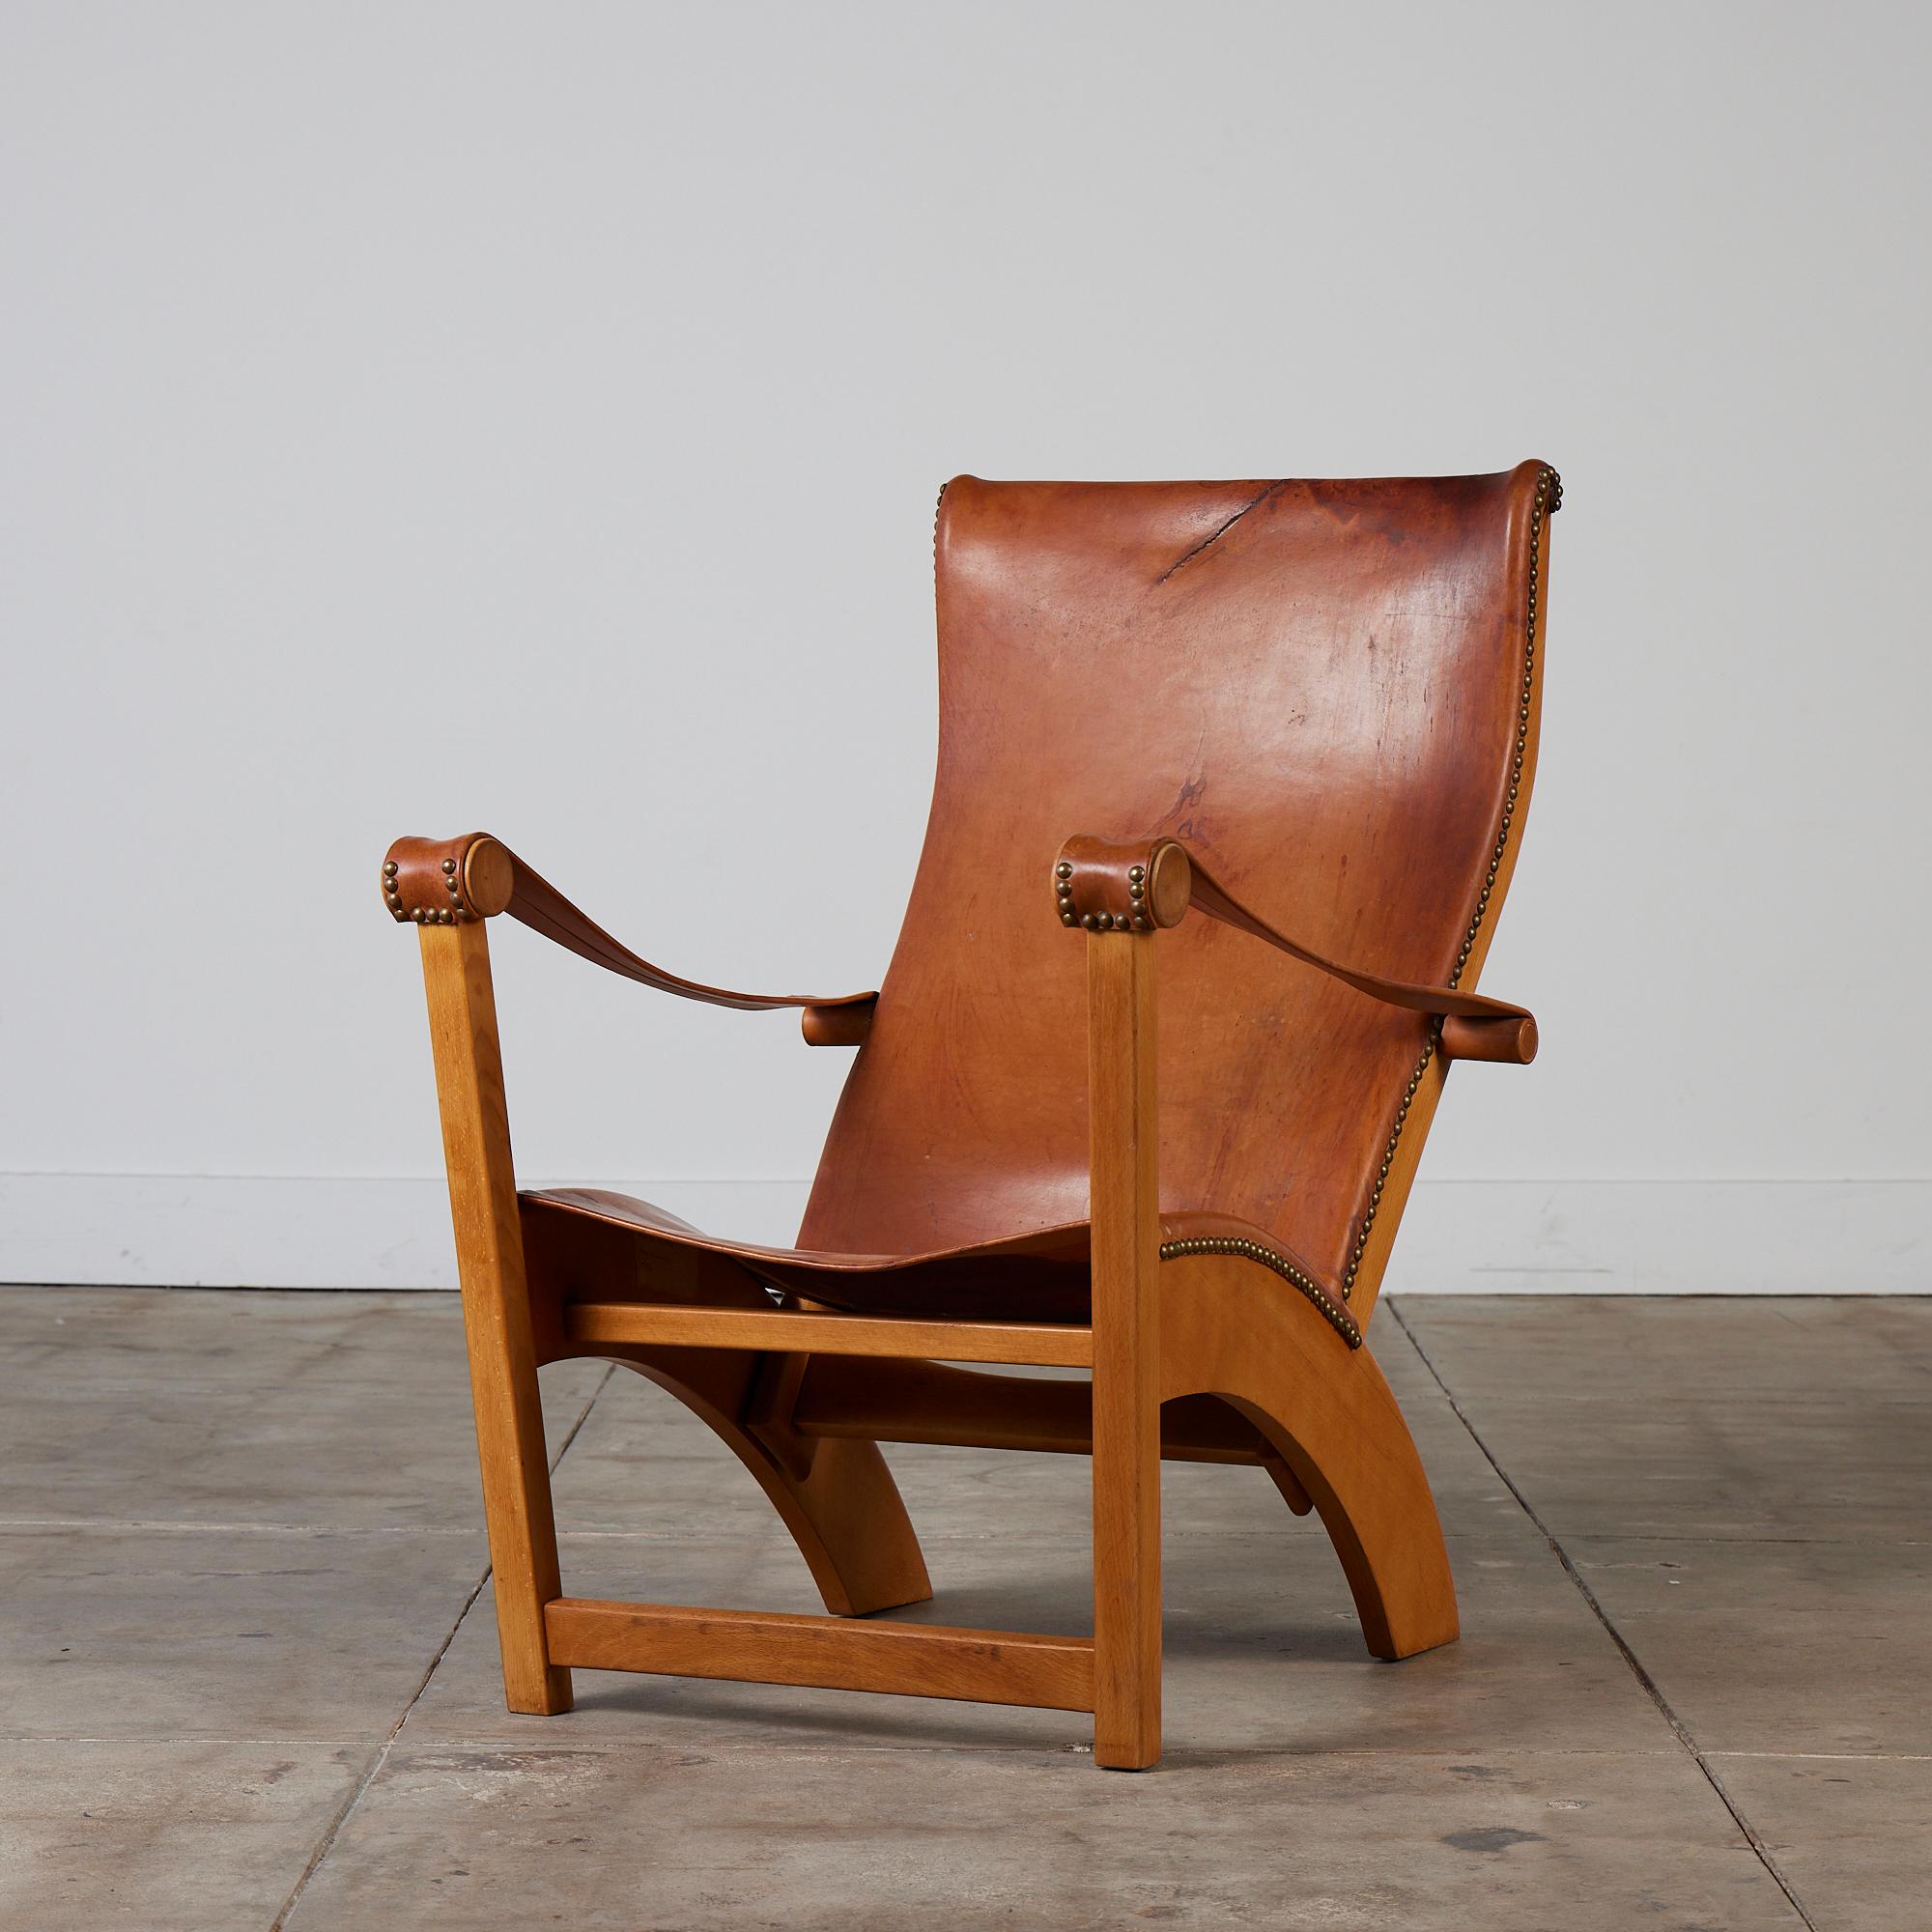 An impressive lounge chair by Mogens Voltelen for Niels Vodder, c.1936, Denmark. This comfortable lounge chair features a stunning sculptural beech wood frame and legs. The aged cognac saddle leather back, seat and armrests are rich with unique